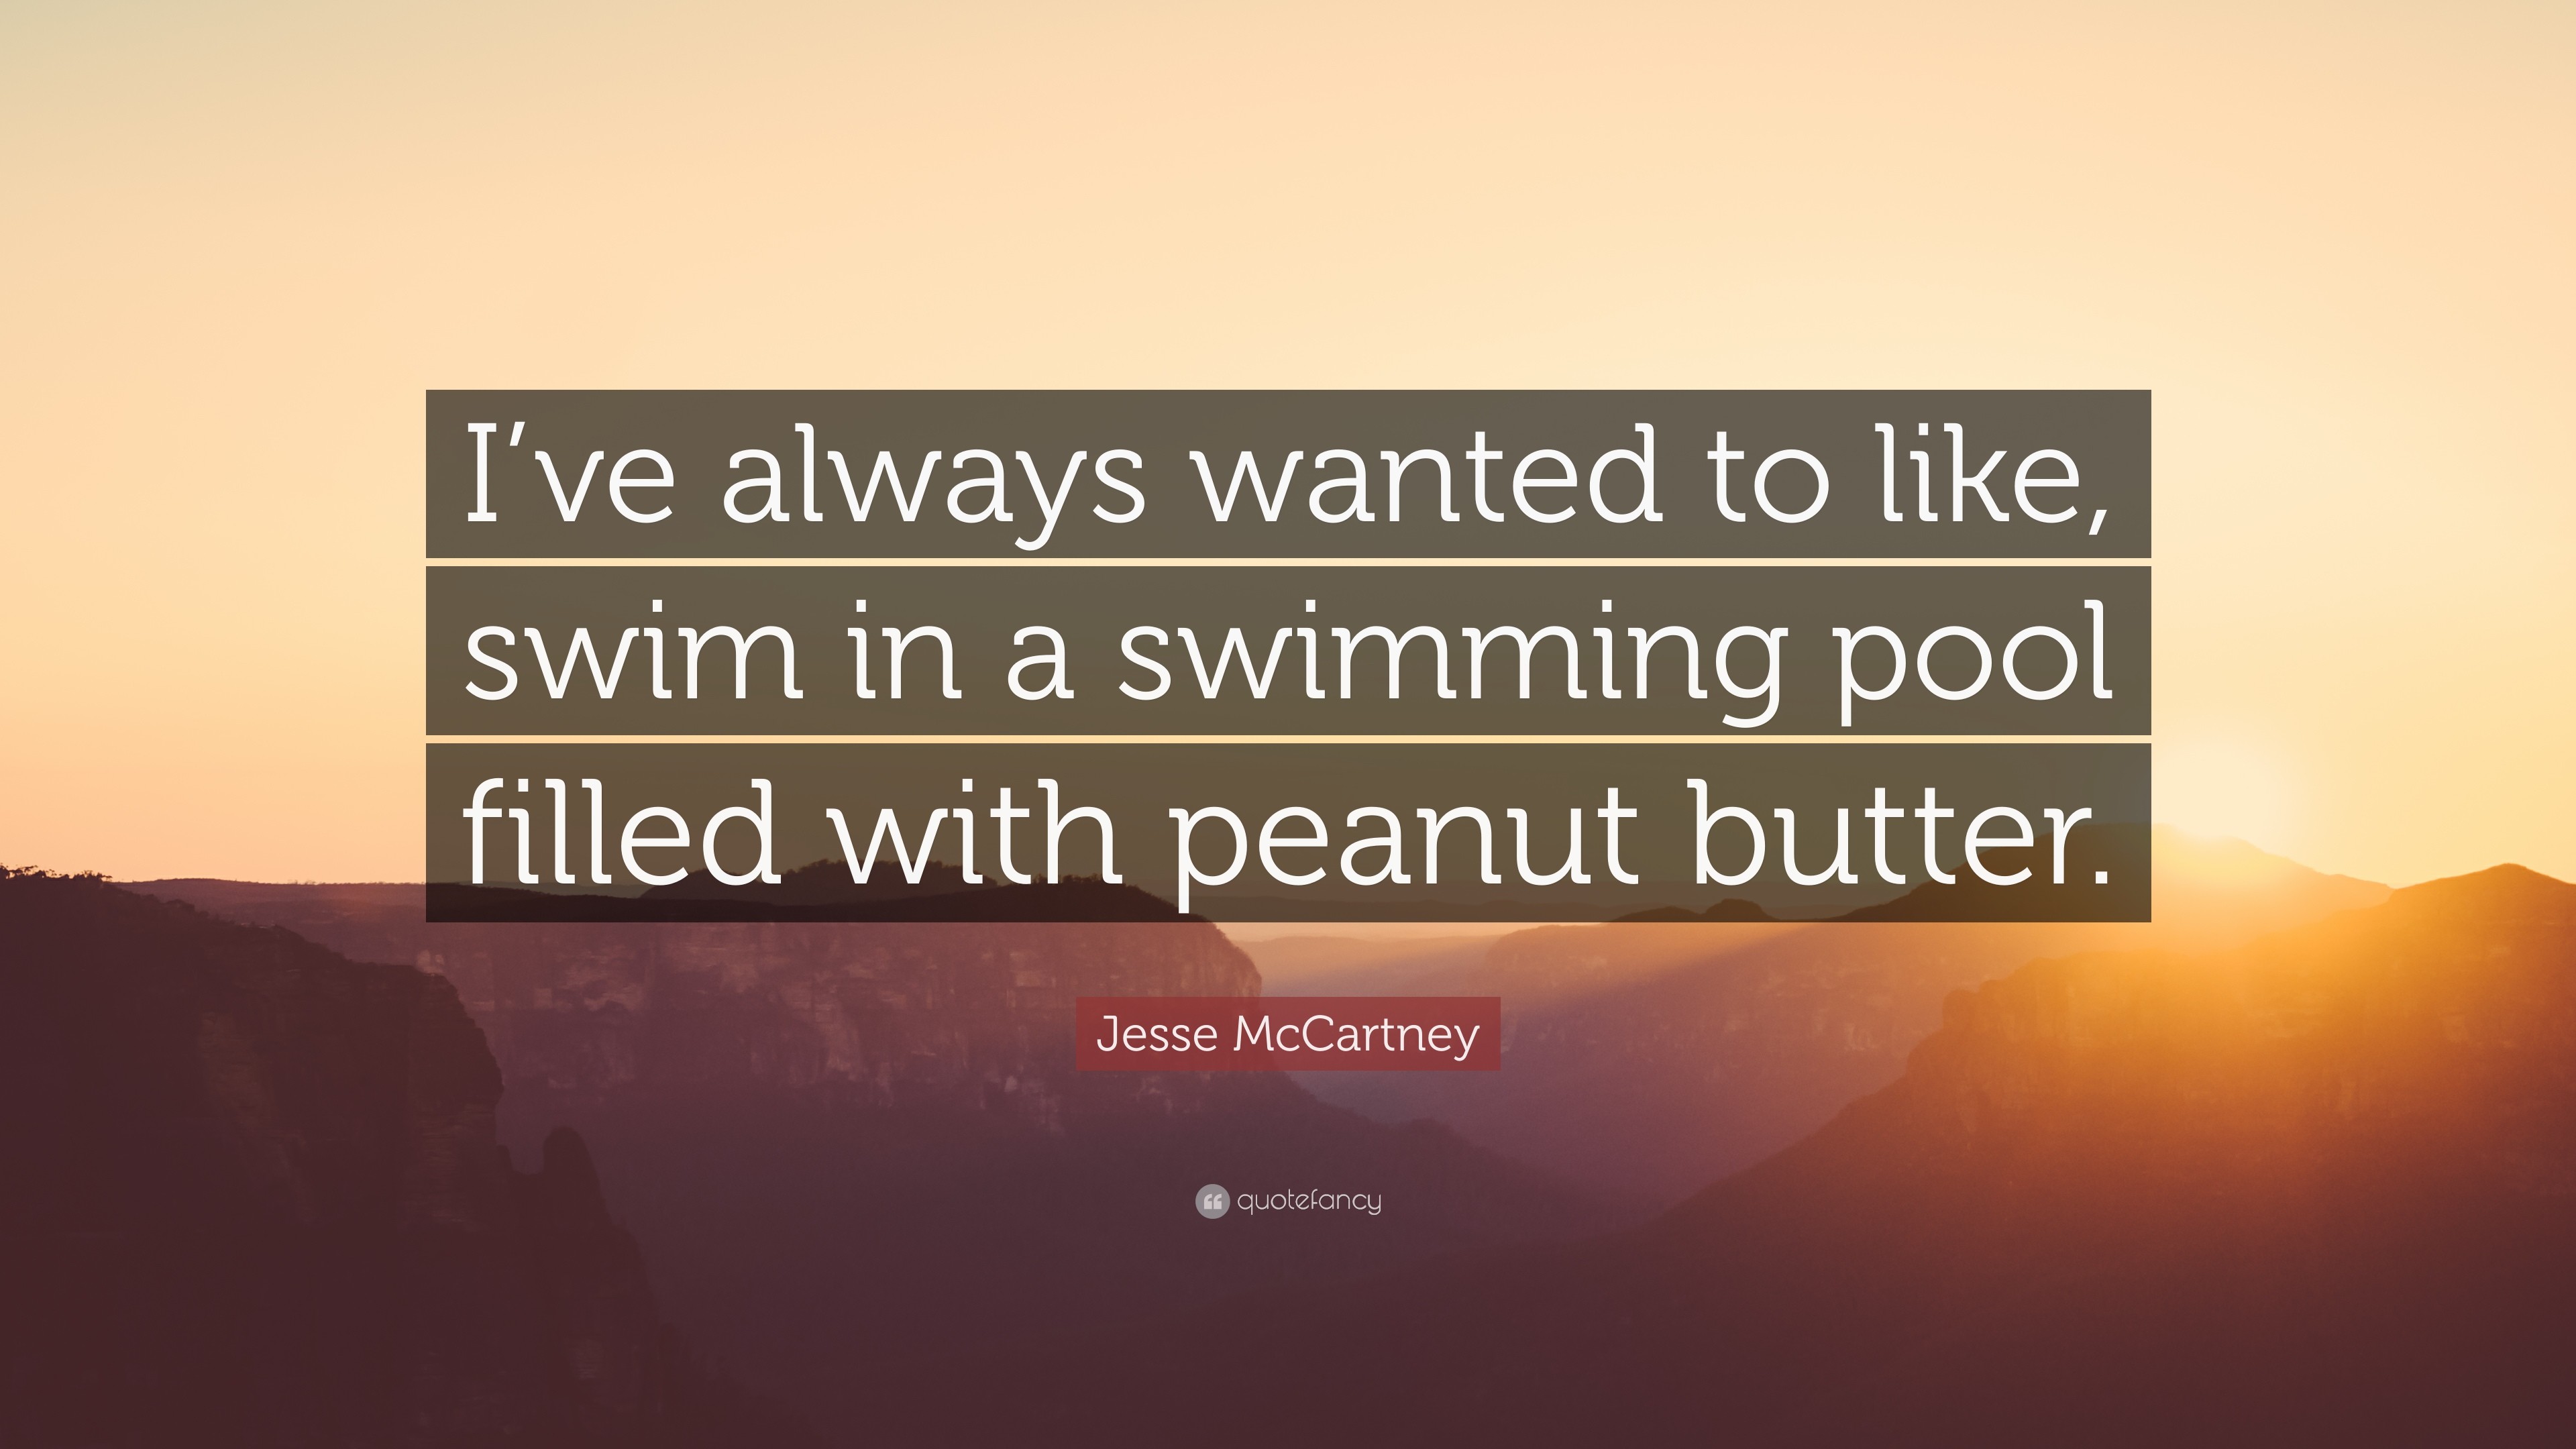 3840x2160 Jesse McCartney Quote: “I've always wanted to like, swim in a